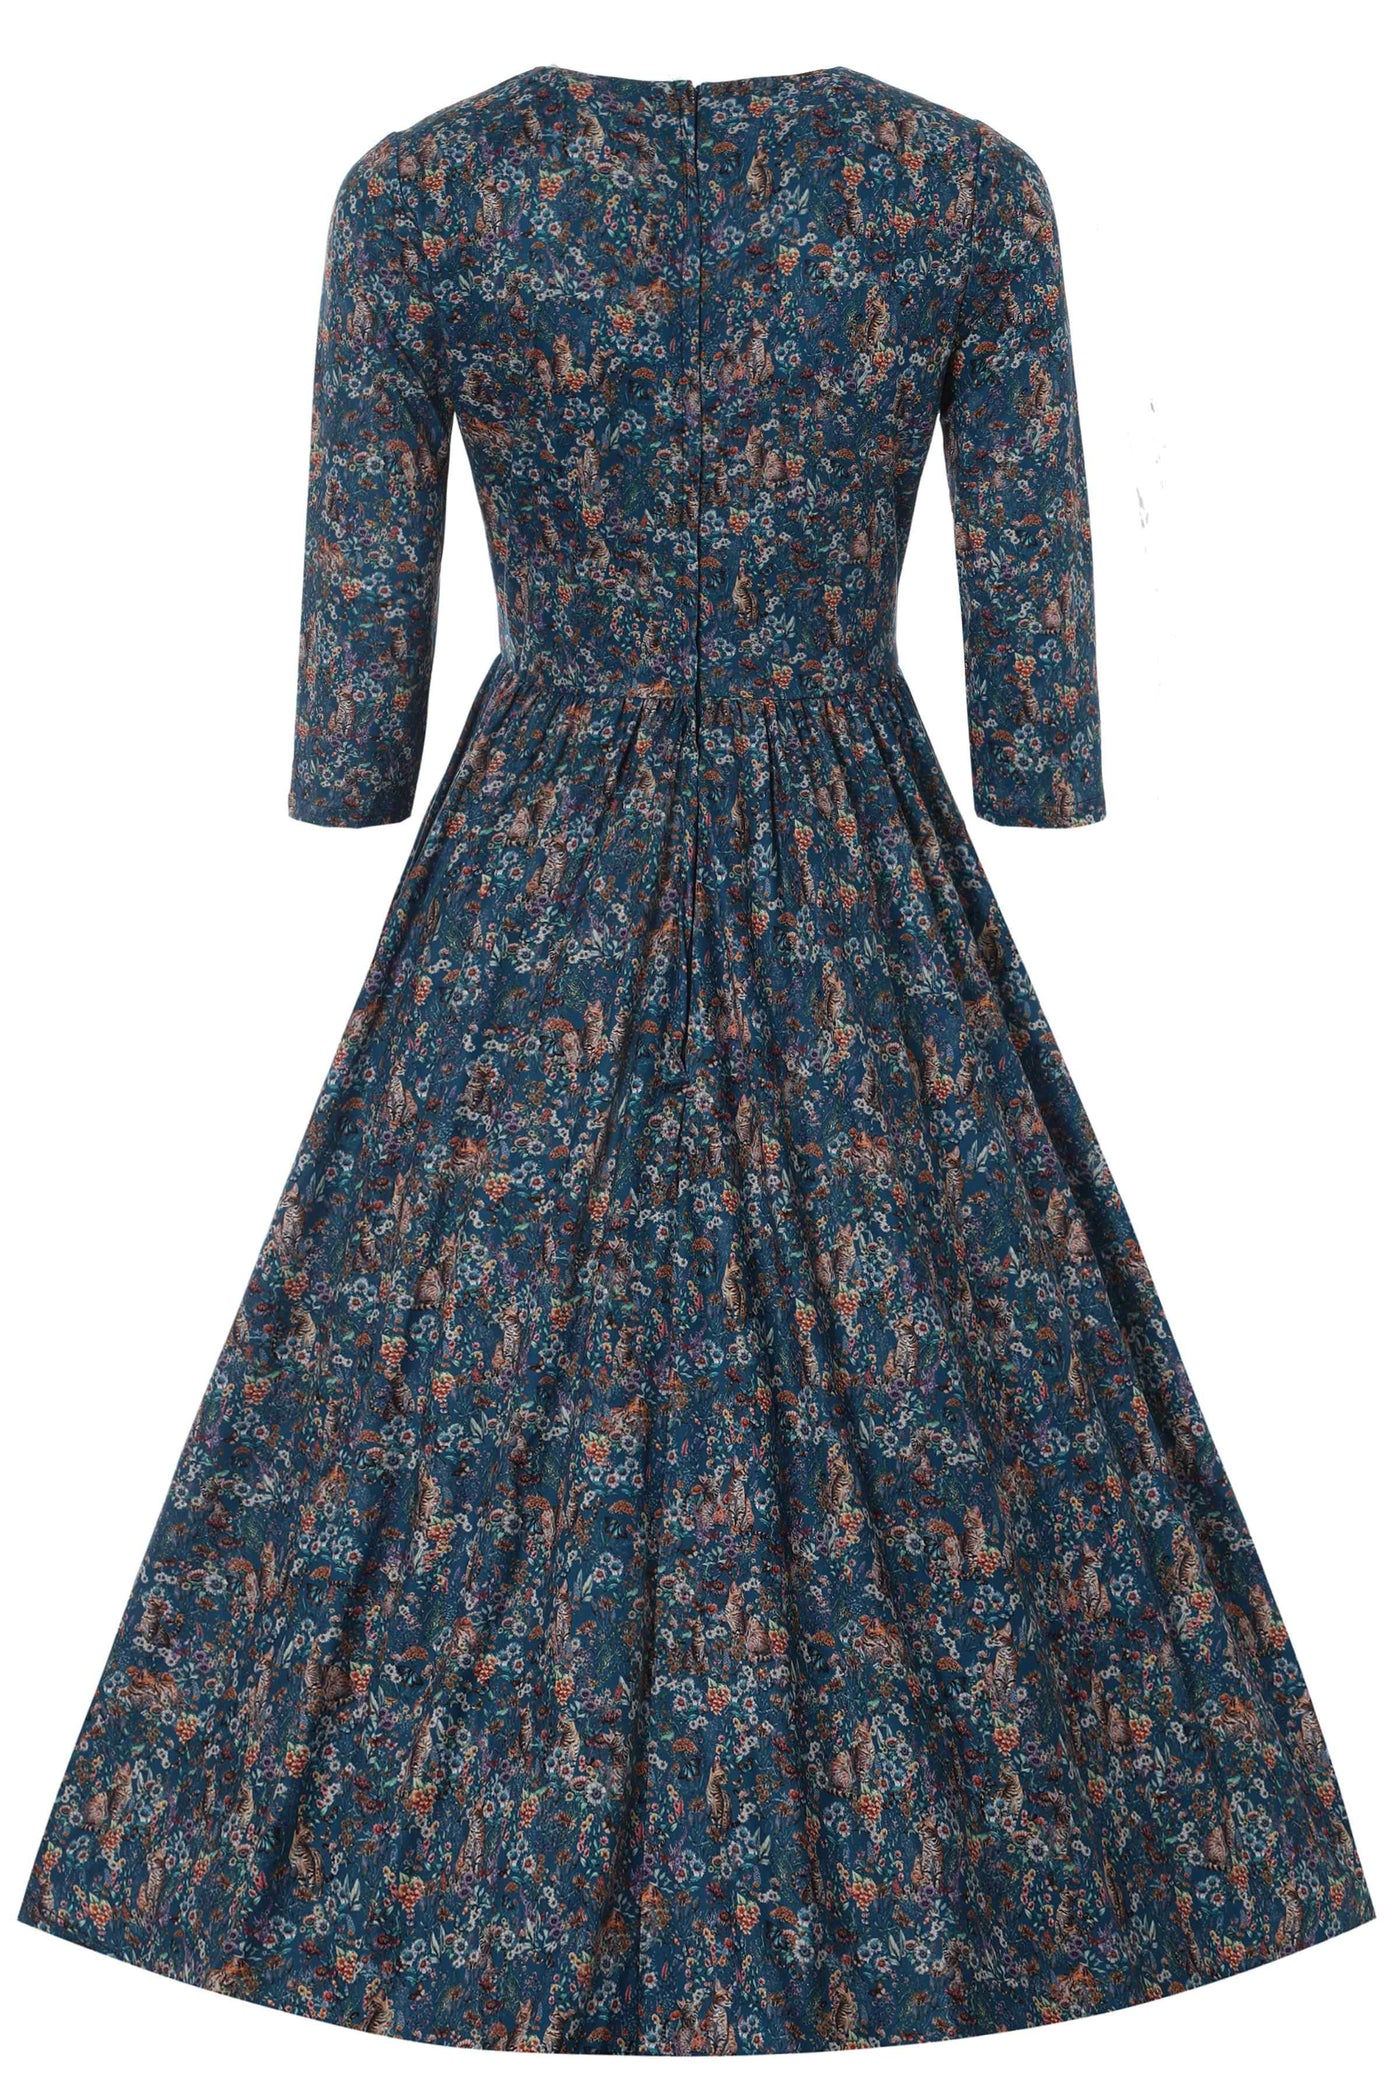 Back View of Bengal Cat Print Long Sleeved Swing Dress in Blue